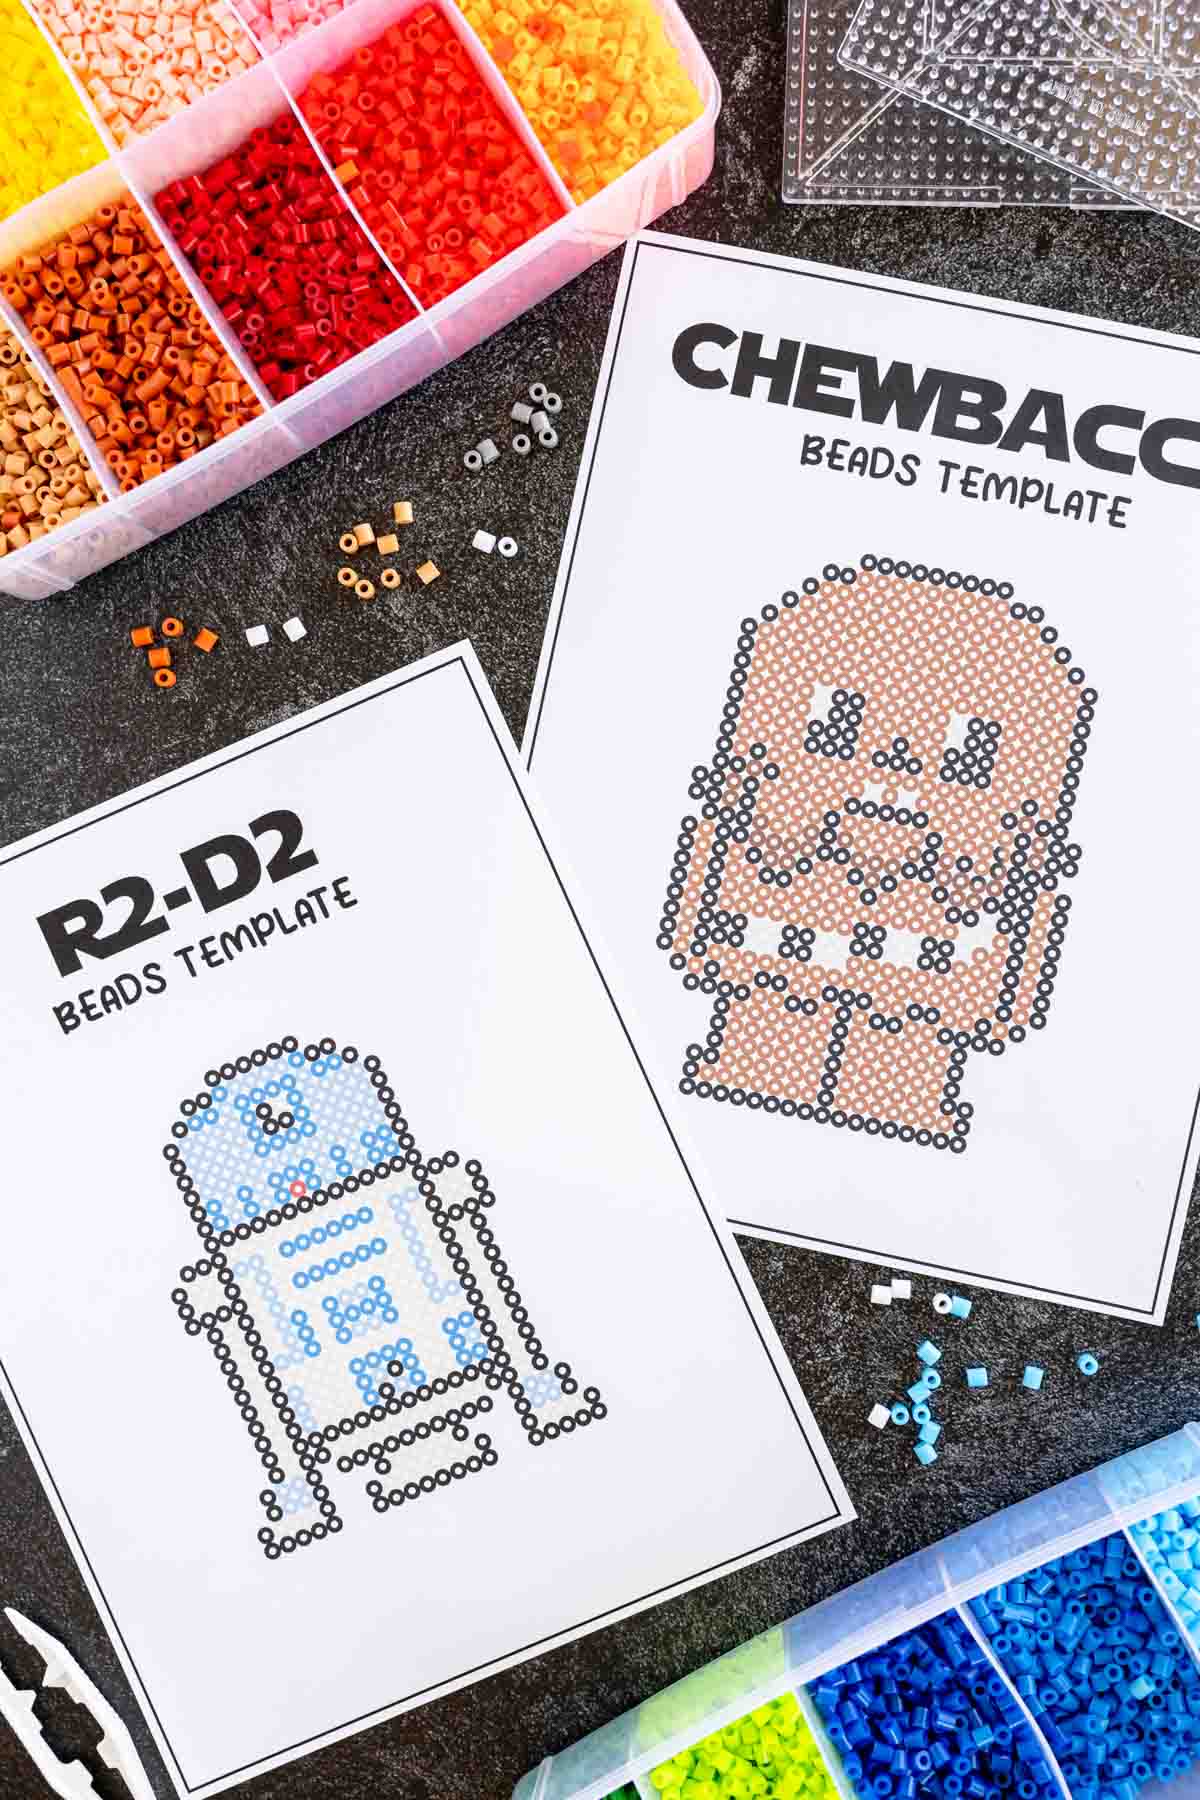 Star Wars perler bead patterns of R2-D2 and Chewbacca